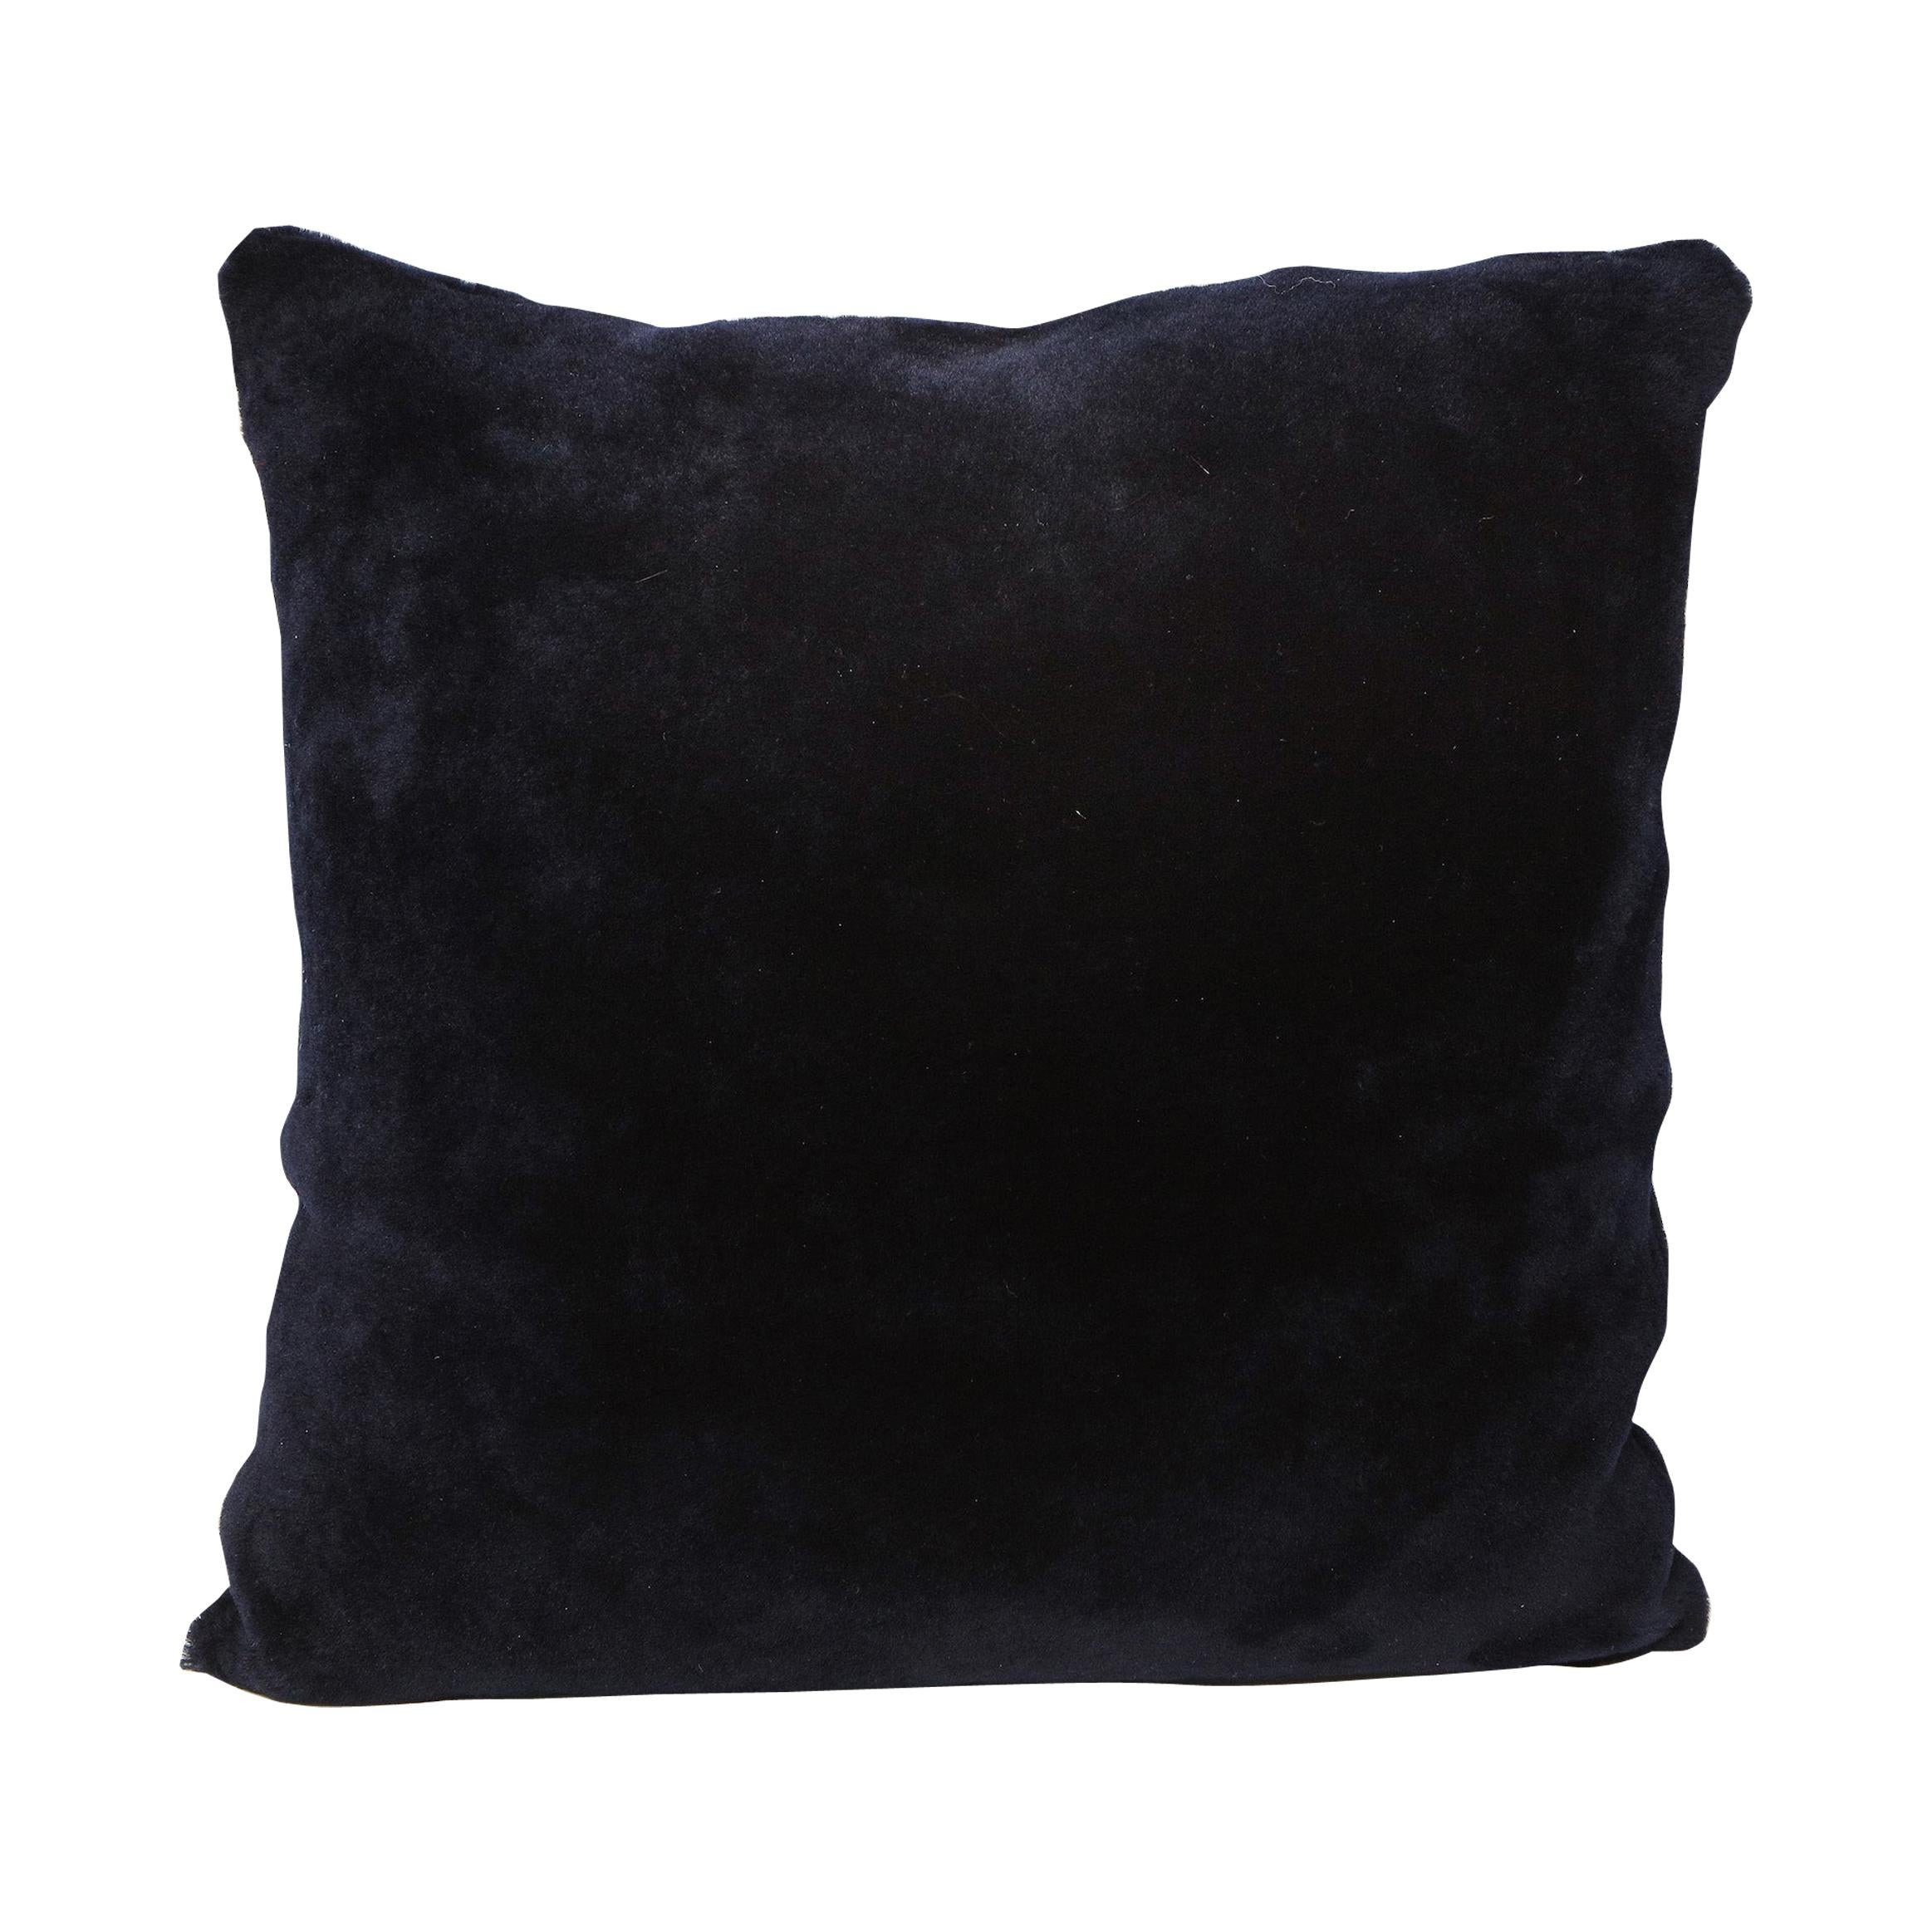 Double Sided Merino Short Hair Shearling Pillow in Midnight Blue Color